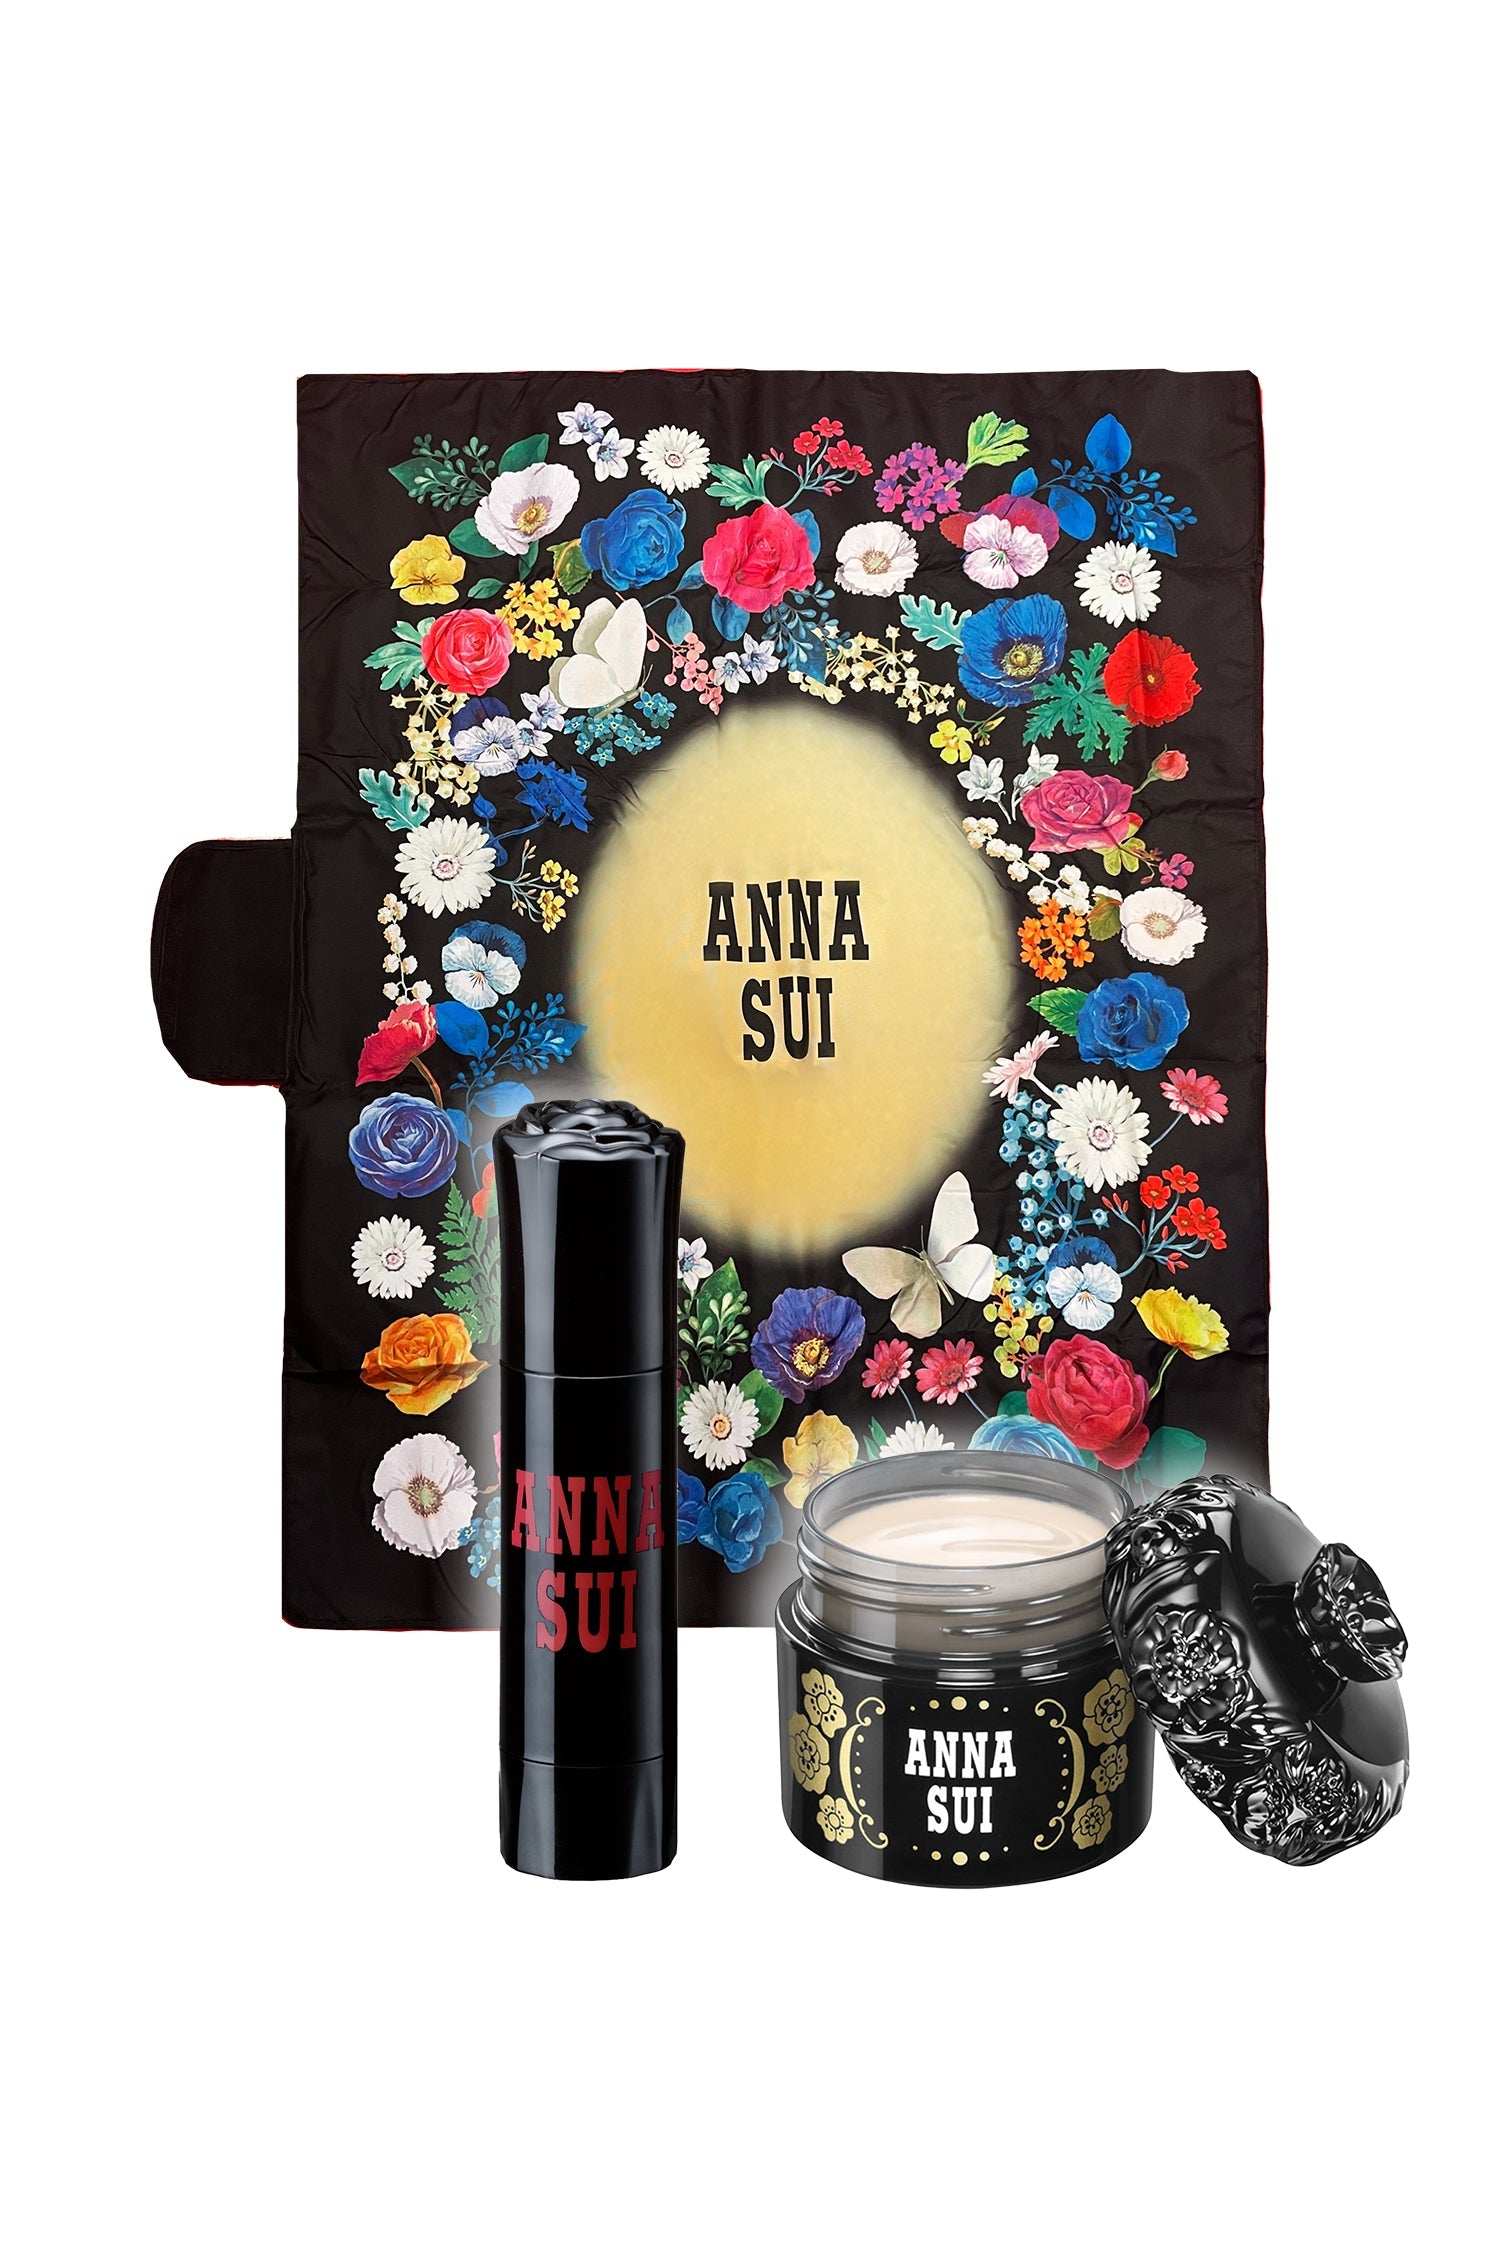 BERRY light cheek and primer set, the Anna Sui on cylinder case with a rose on top plus a black round case  